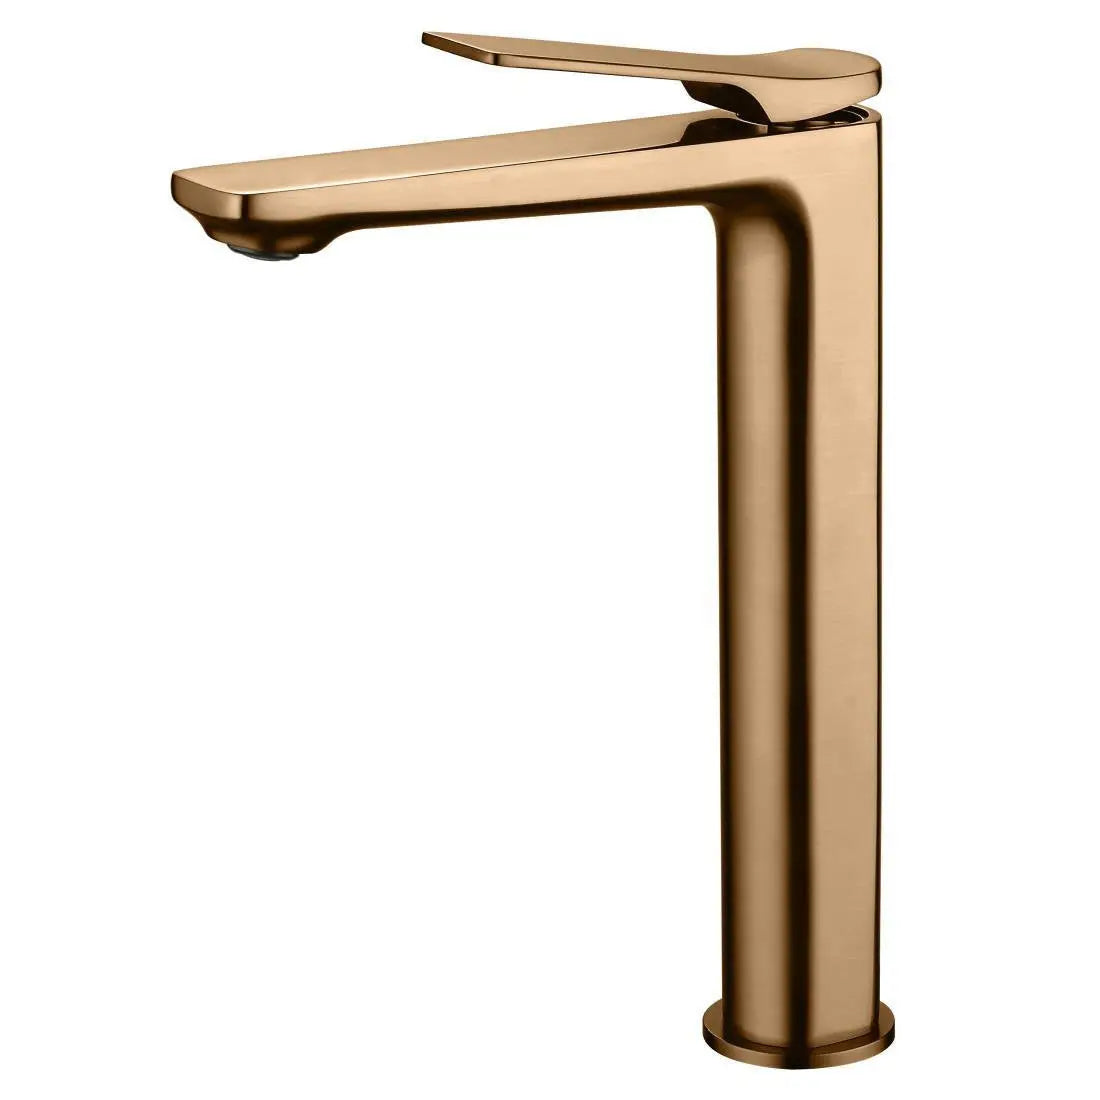 Tall Brushed Copper Bathroom Sink Tap Mixer Single Lever Basin Taps